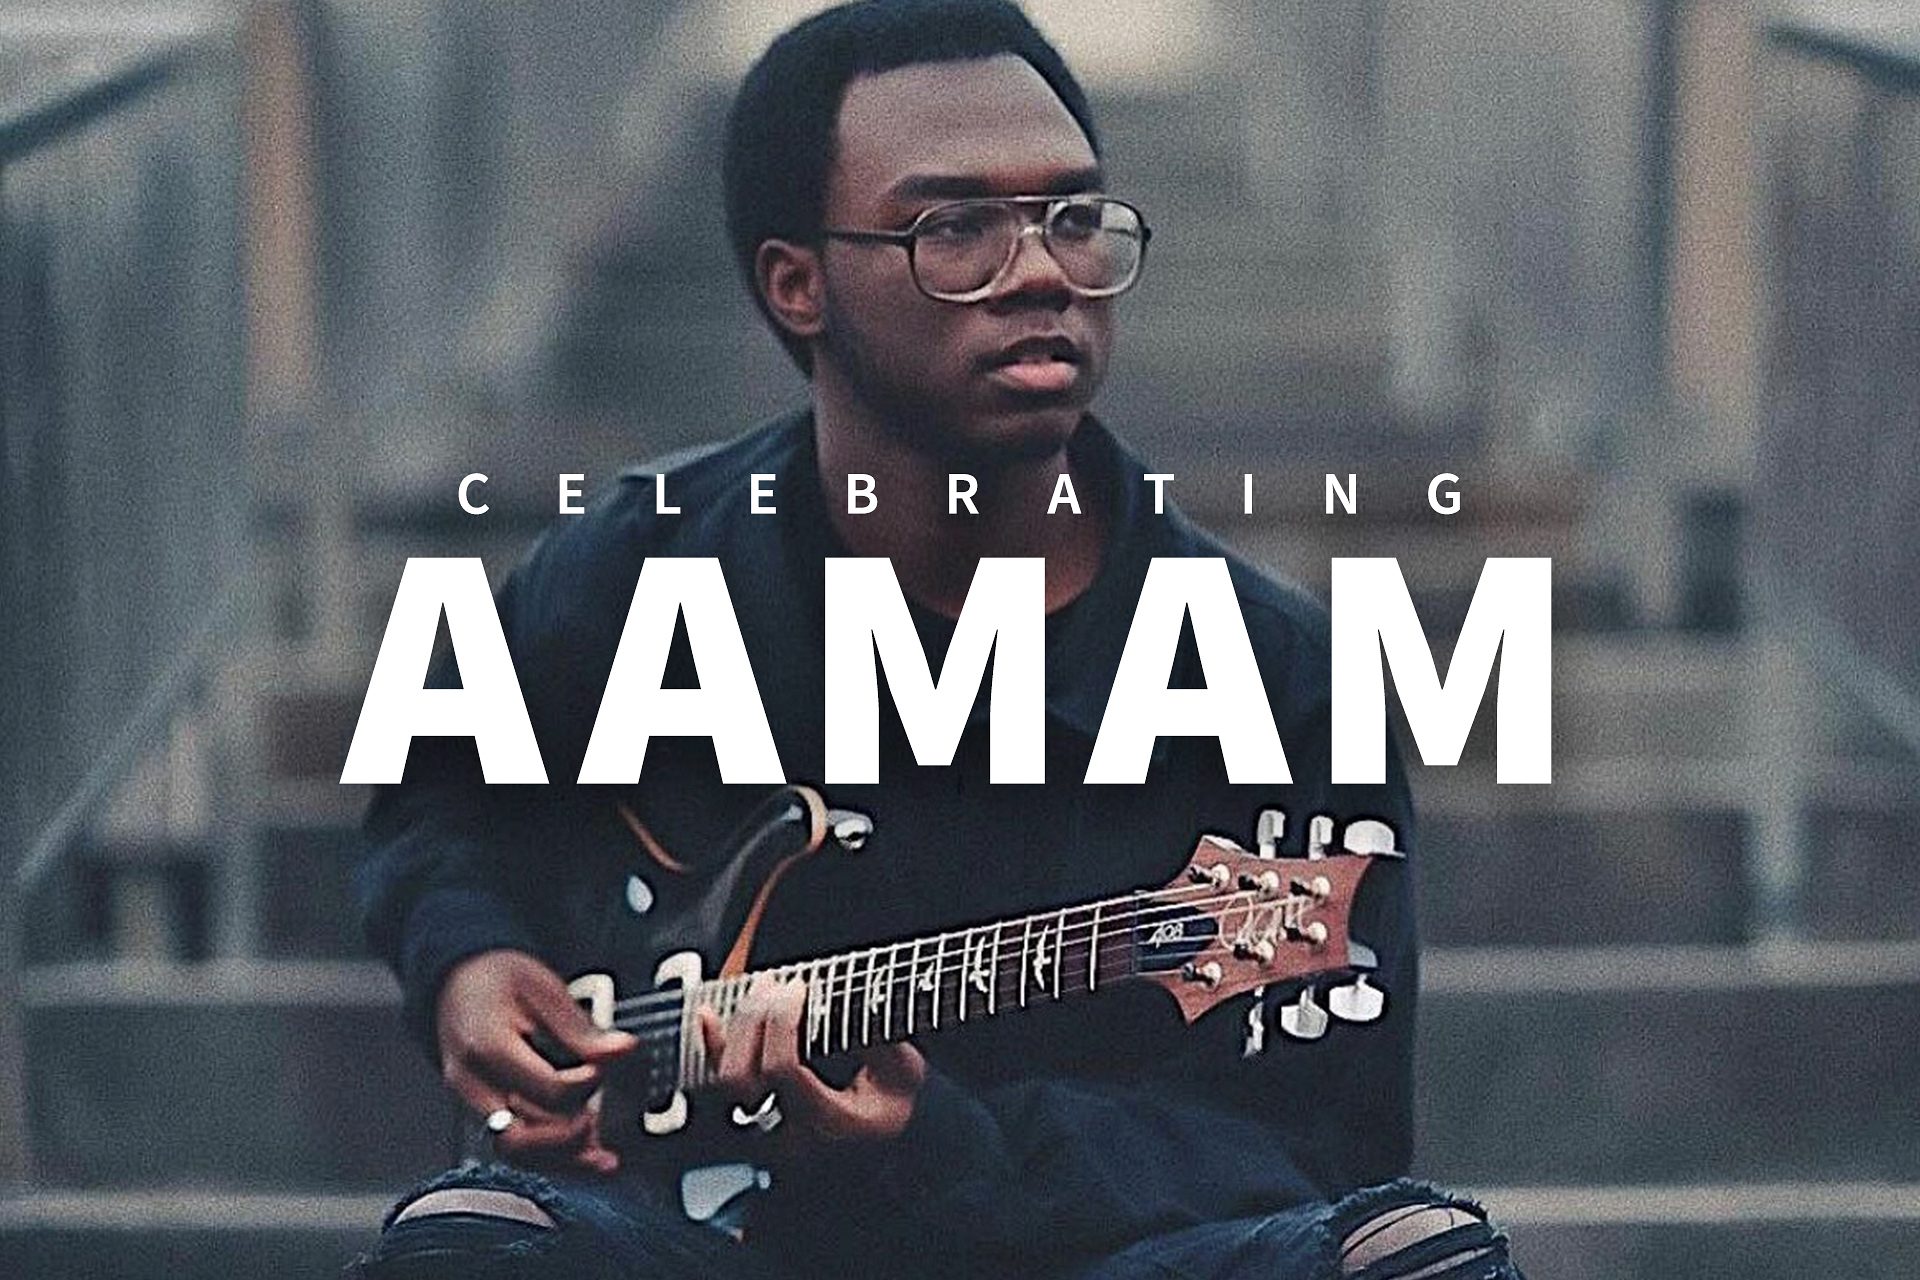 Celebrating African American Music Appreciation Month 2021